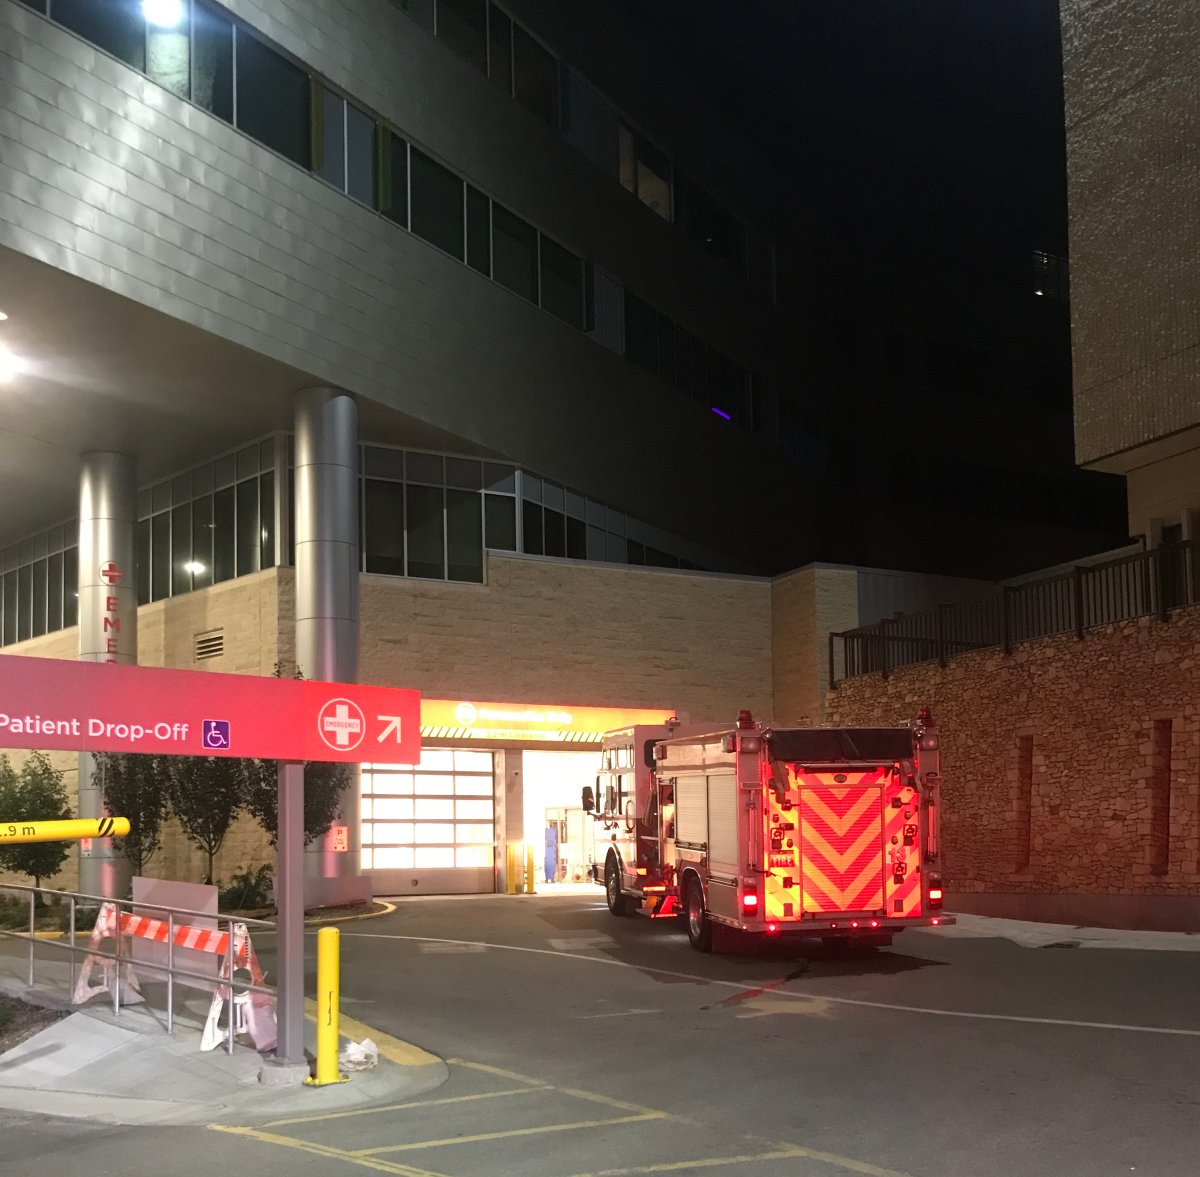 A patient in the Jim Pattison Children's Hospital was burned when an oxygen source caught fire, according to the Saskatoon Fire Department.